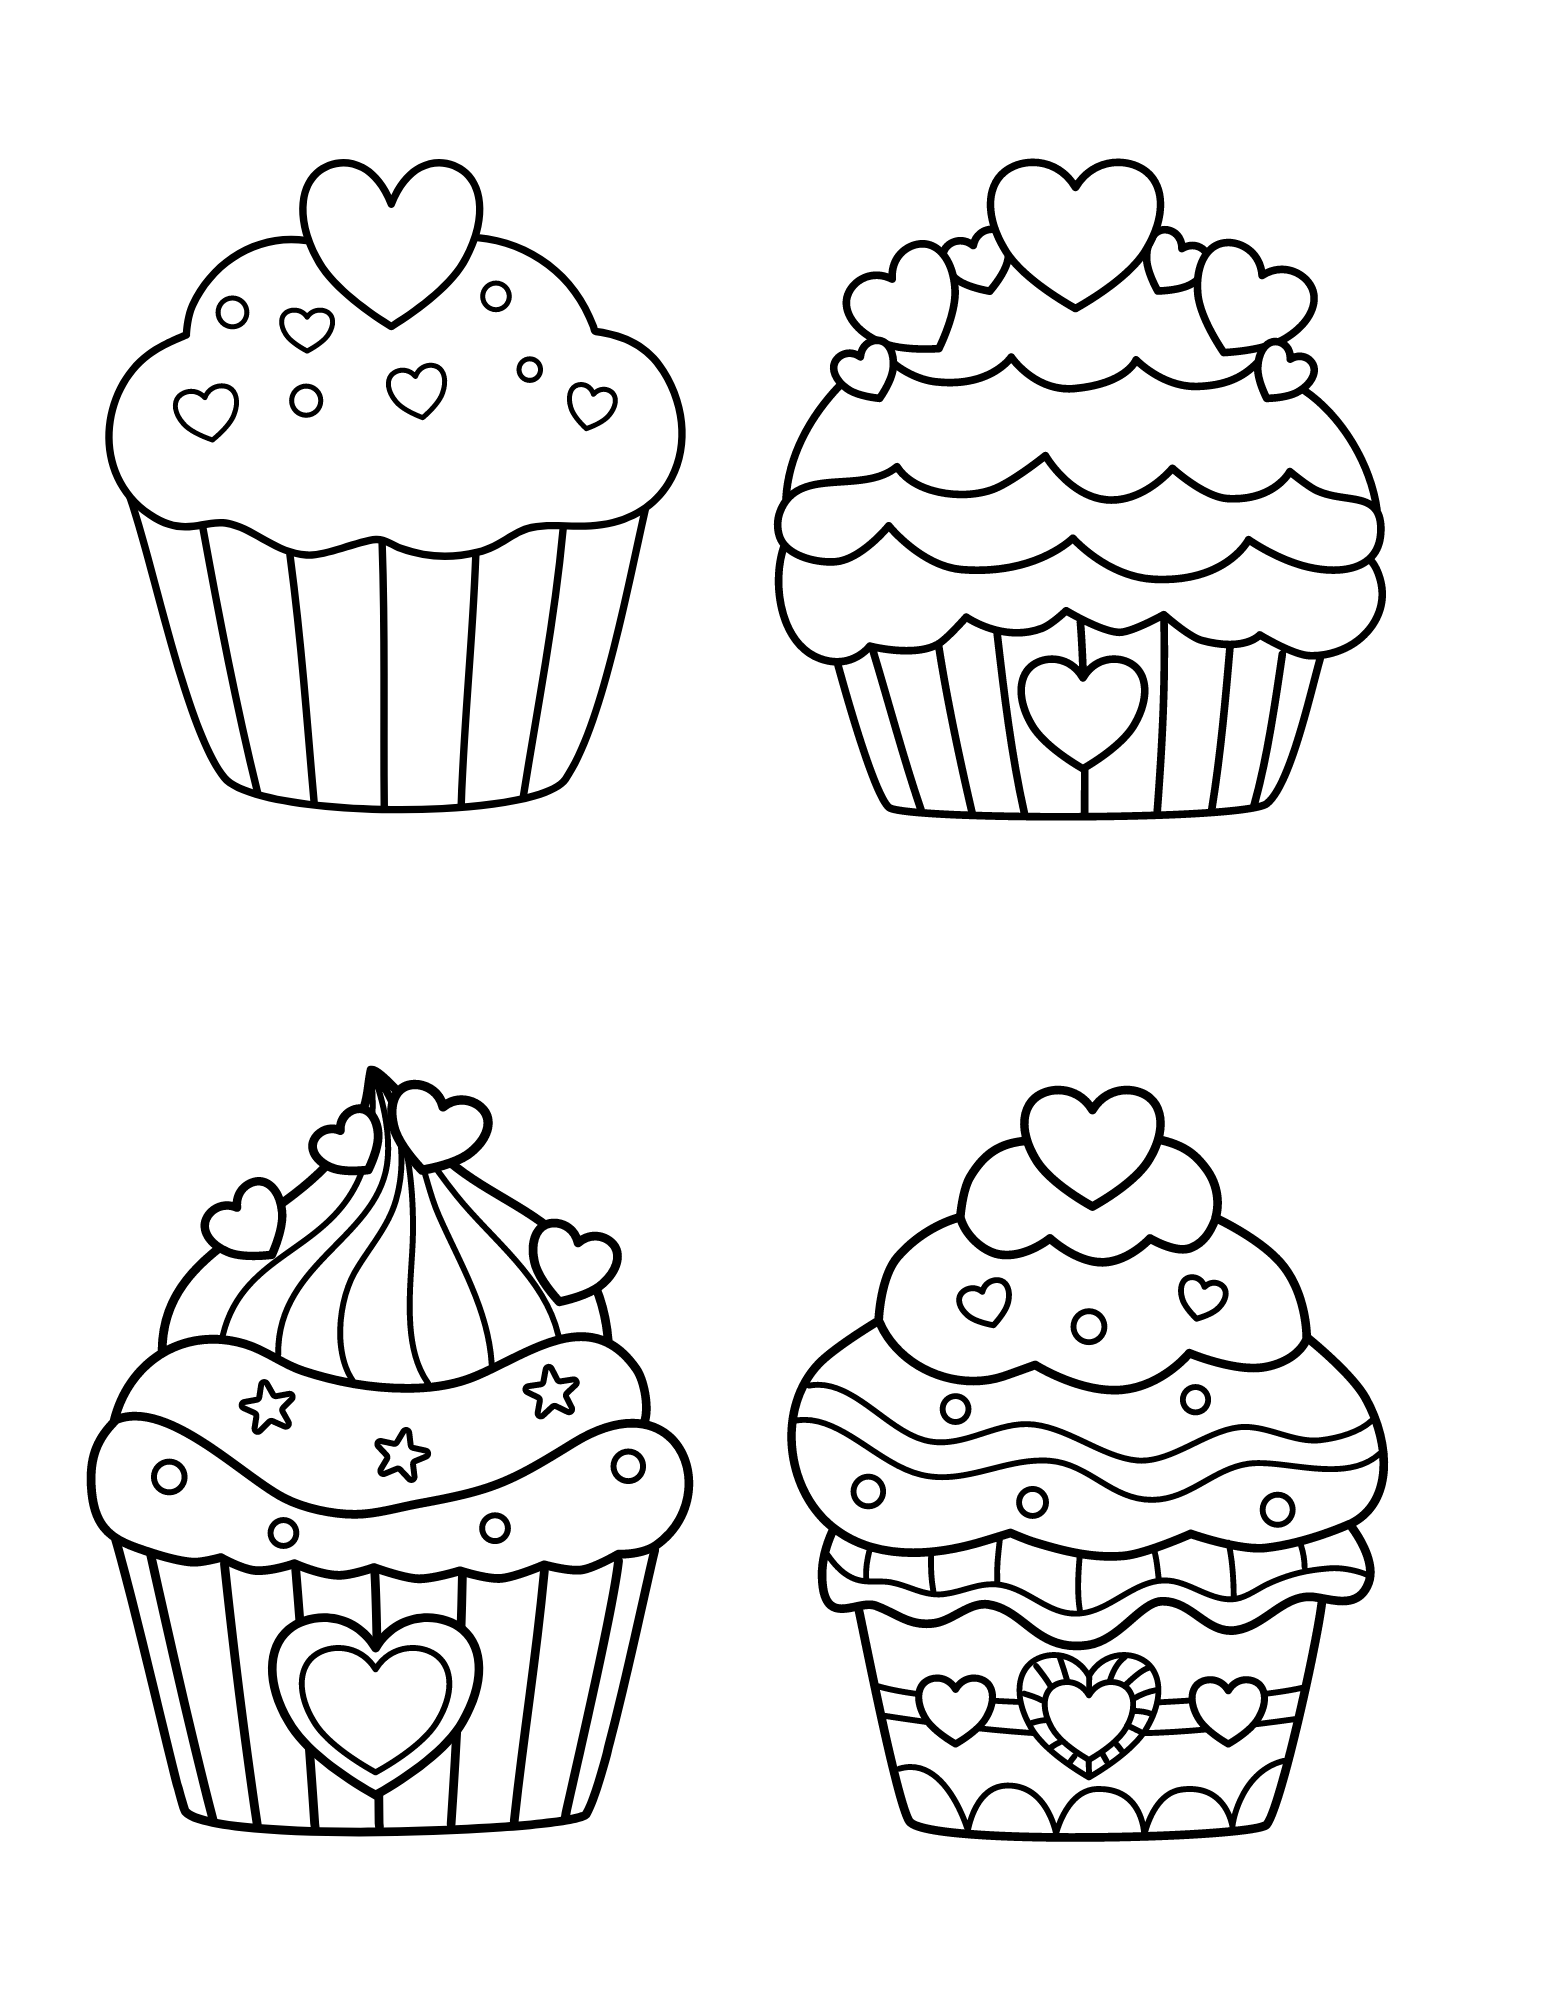 Print these cute cupcake coloring pages for kids and adults